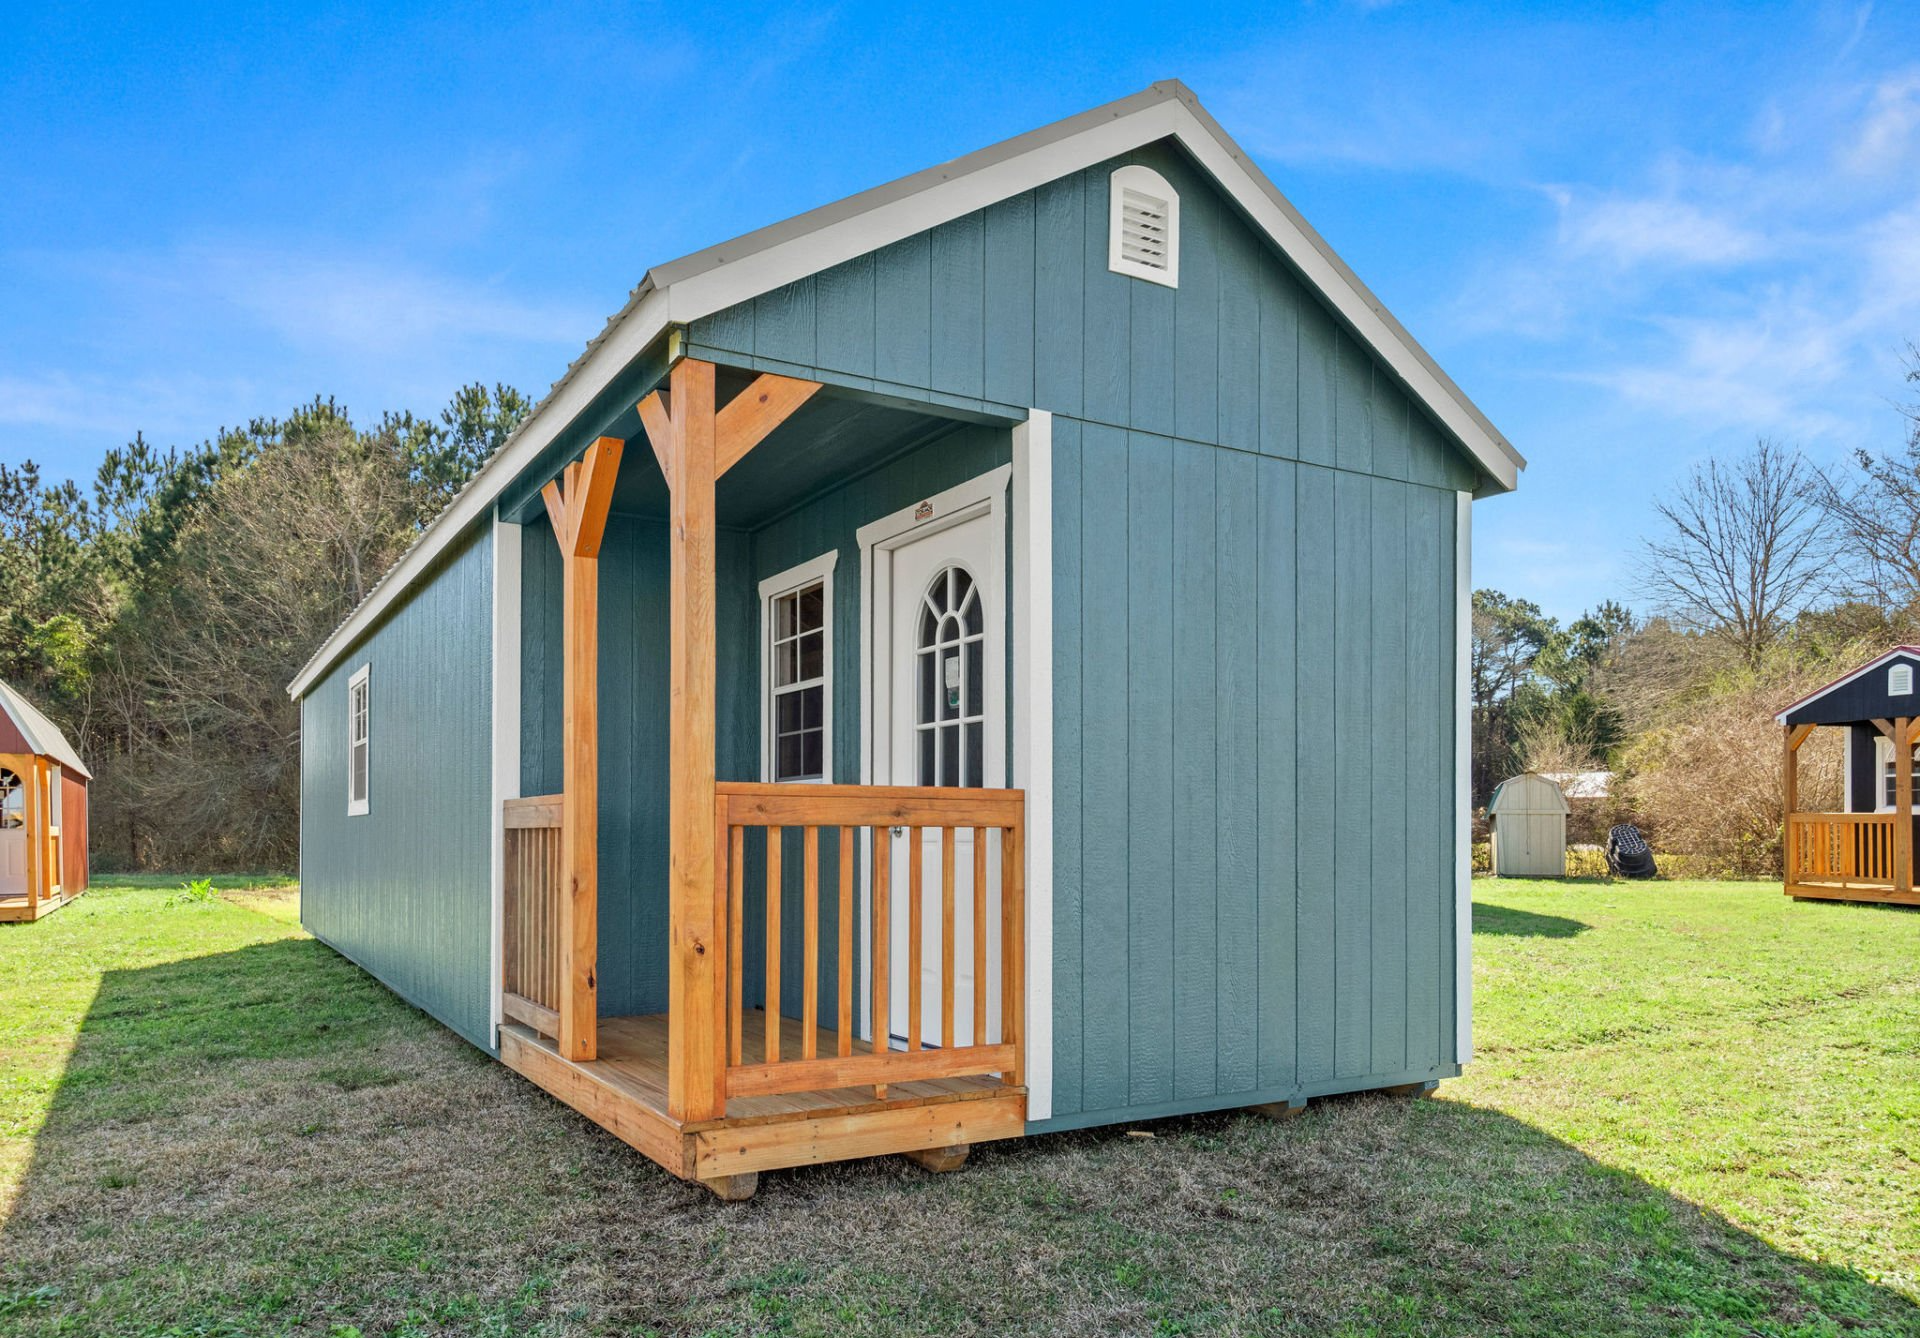 tor-Mor-Deluxe-Side-Cabin-1-Shed-Portable-Building-Garage-Cabin-Backyard-Carport-Rent-to-Own-No-Credit-Check-Storage